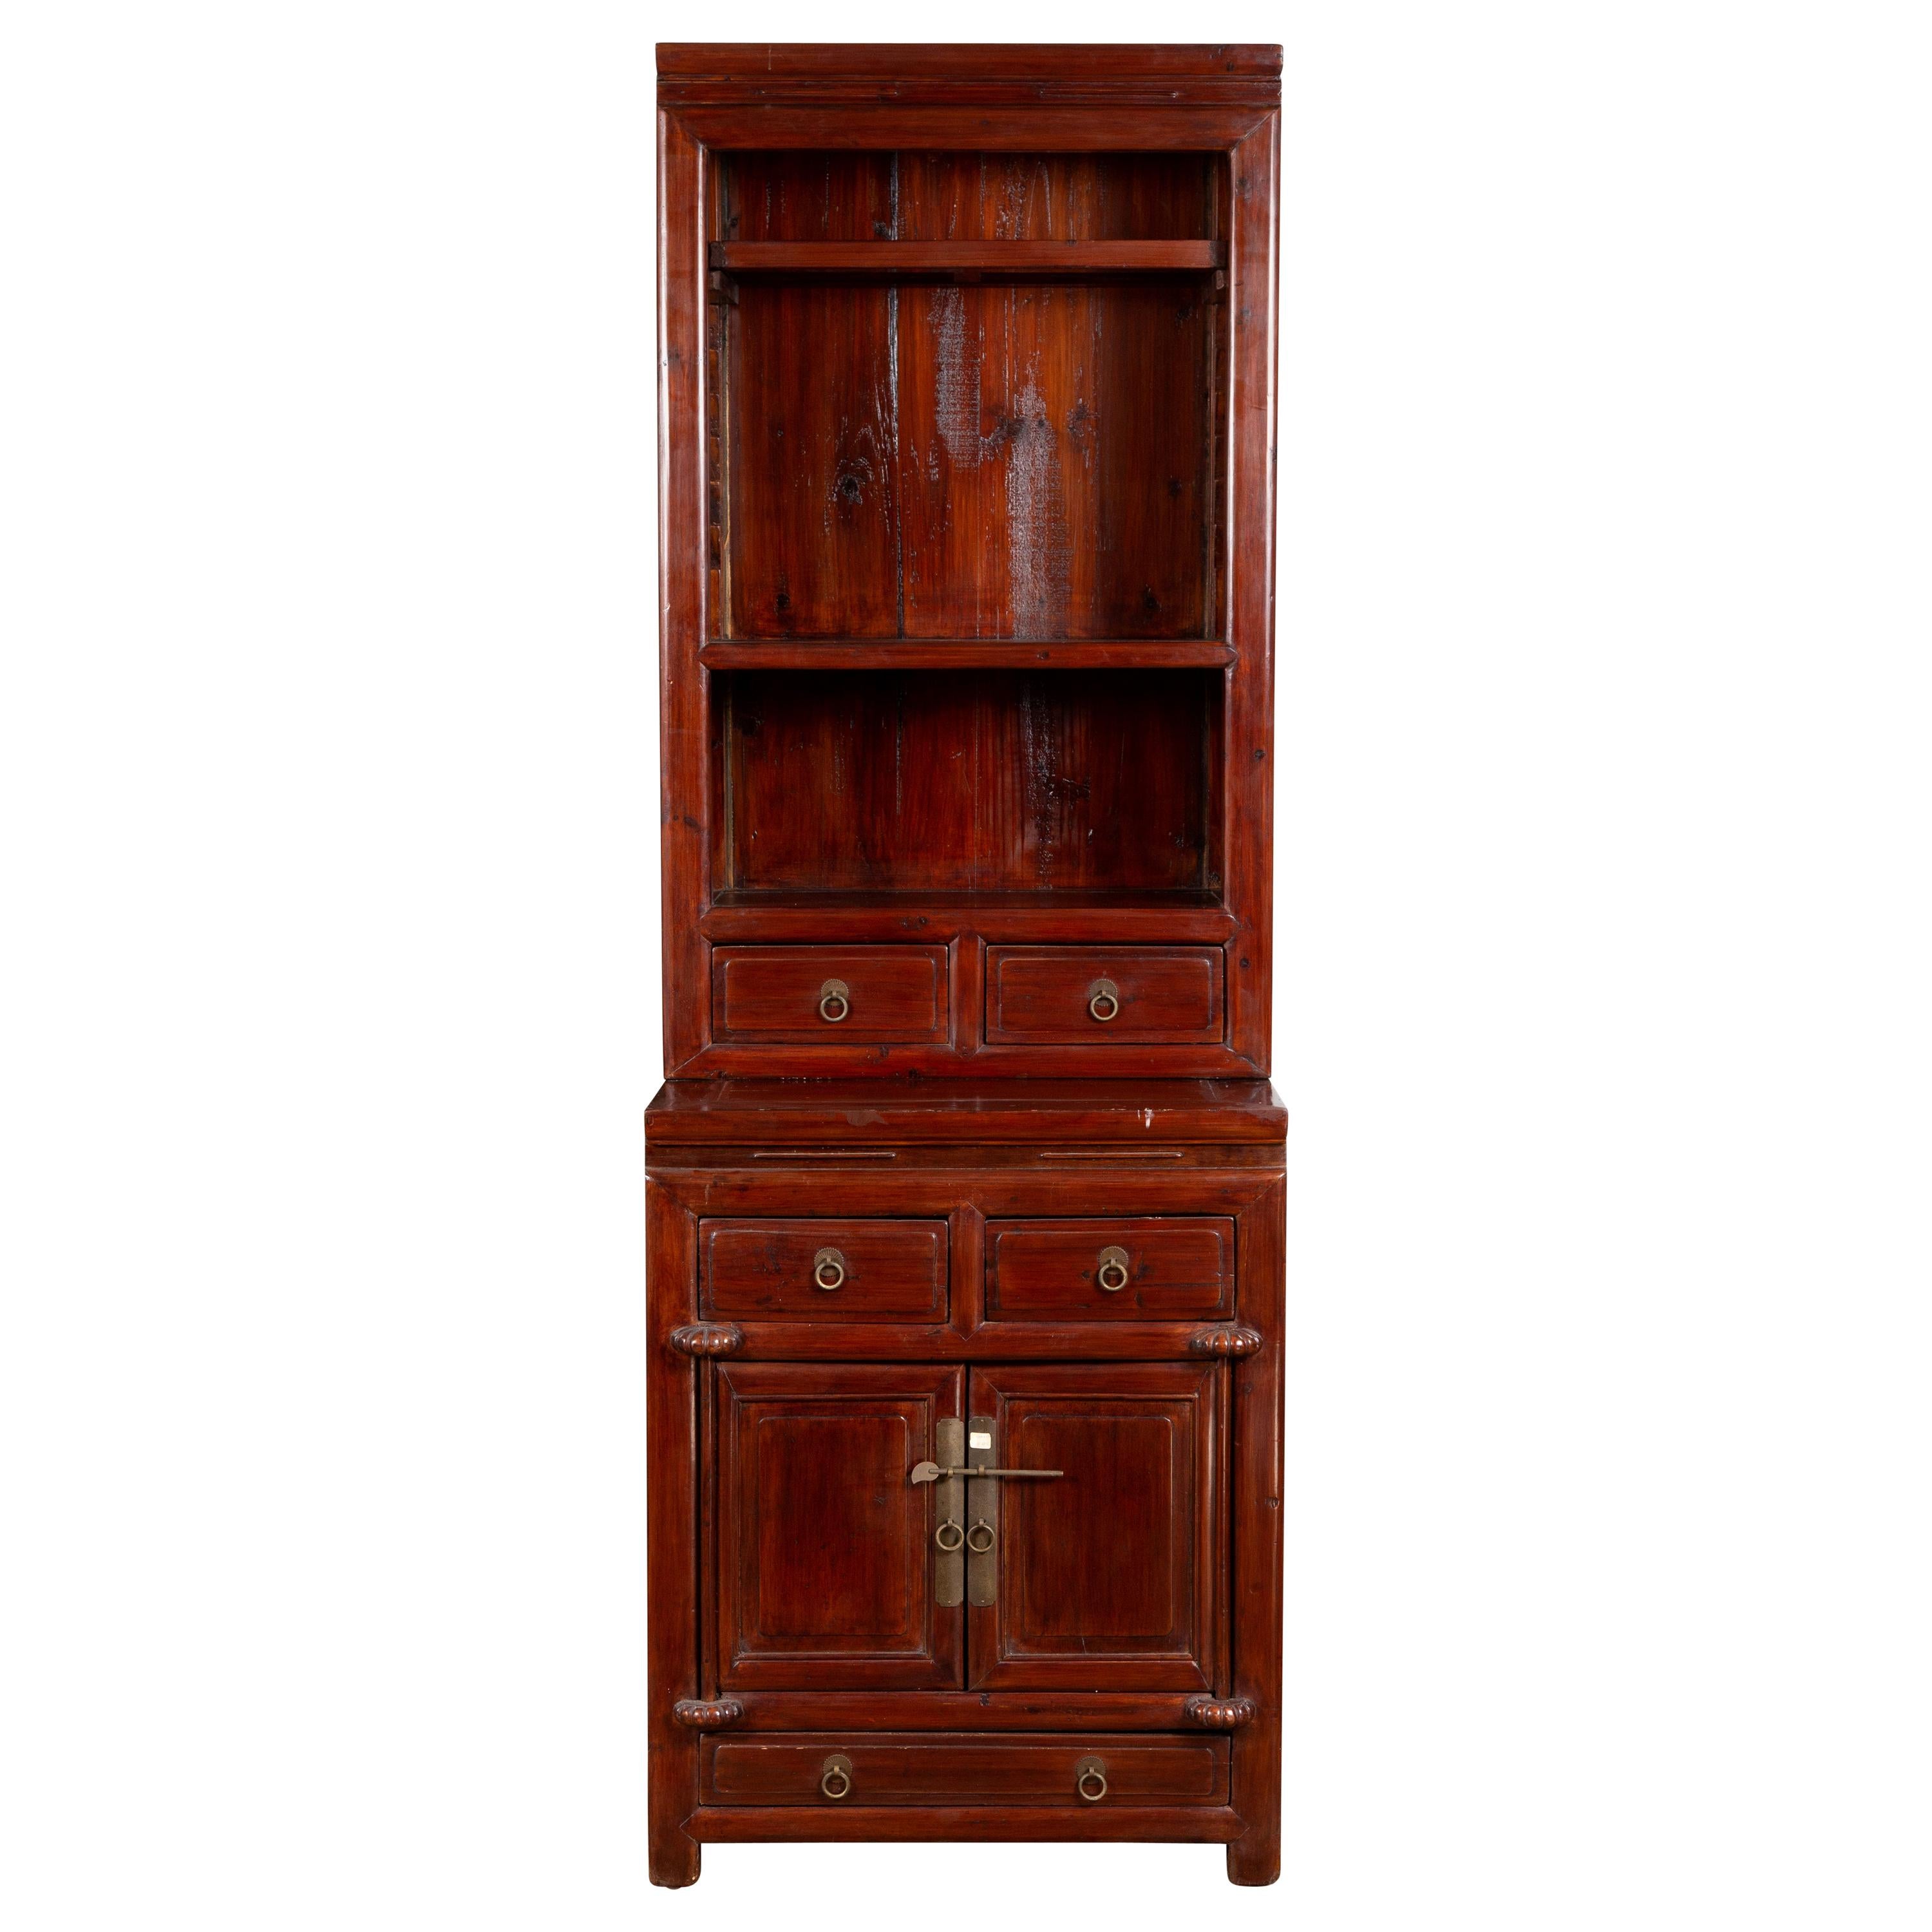 Tall Antique Chinese Two-Part Lacquered Cabinet with Shelves, Doors and Drawers